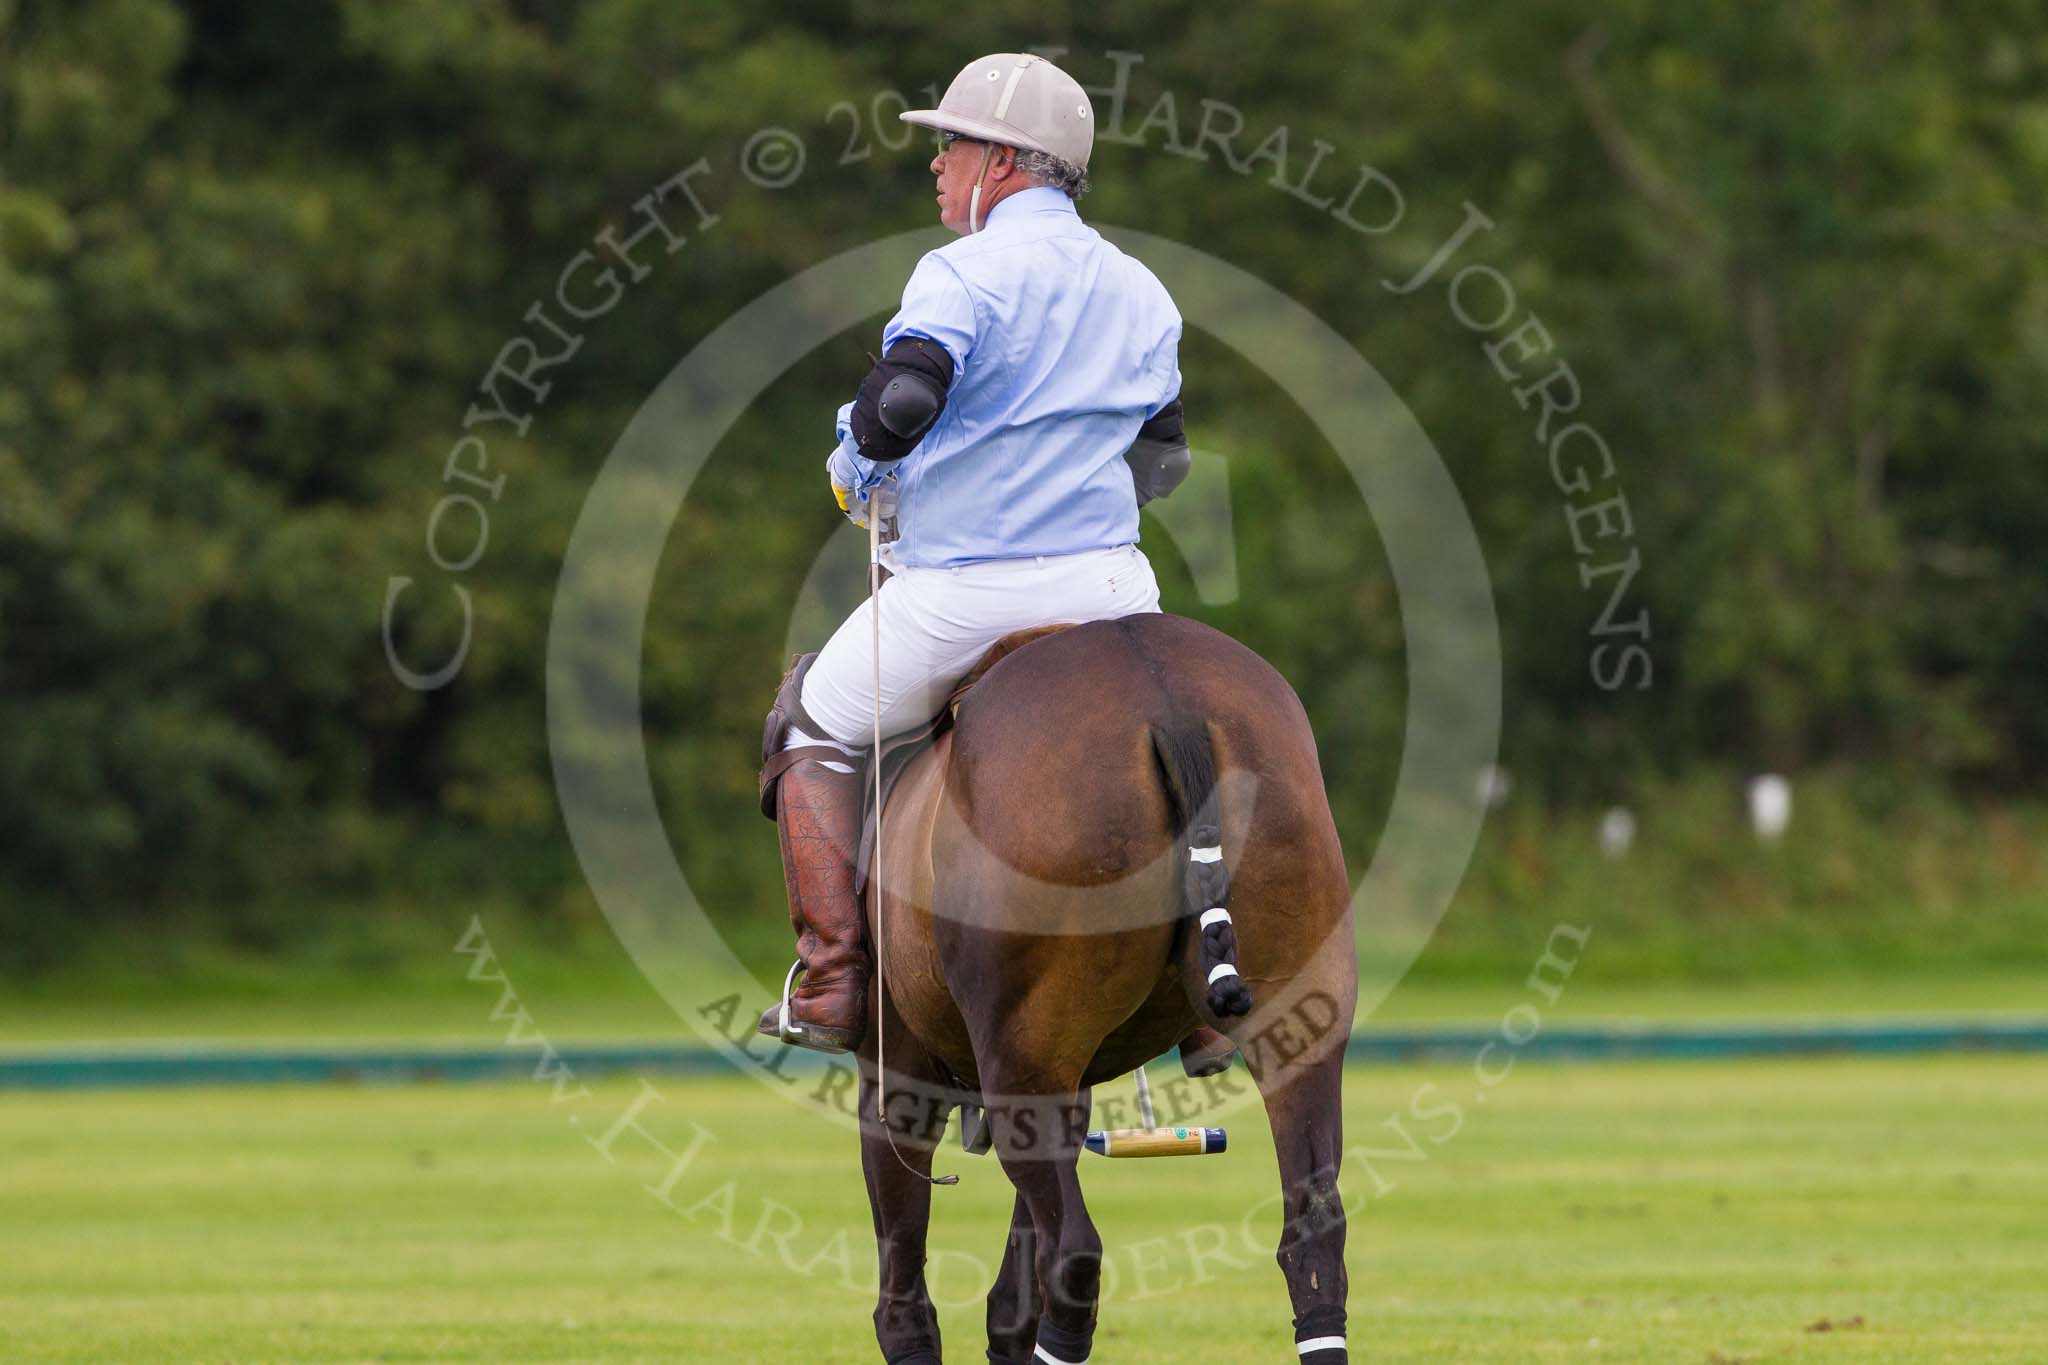 7th Heritage Polo Cup semi-finals: La Mariposa Argentina Mariano Darritchon..
Hurtwood Park Polo Club,
Ewhurst Green,
Surrey,
United Kingdom,
on 04 August 2012 at 15:39, image #260